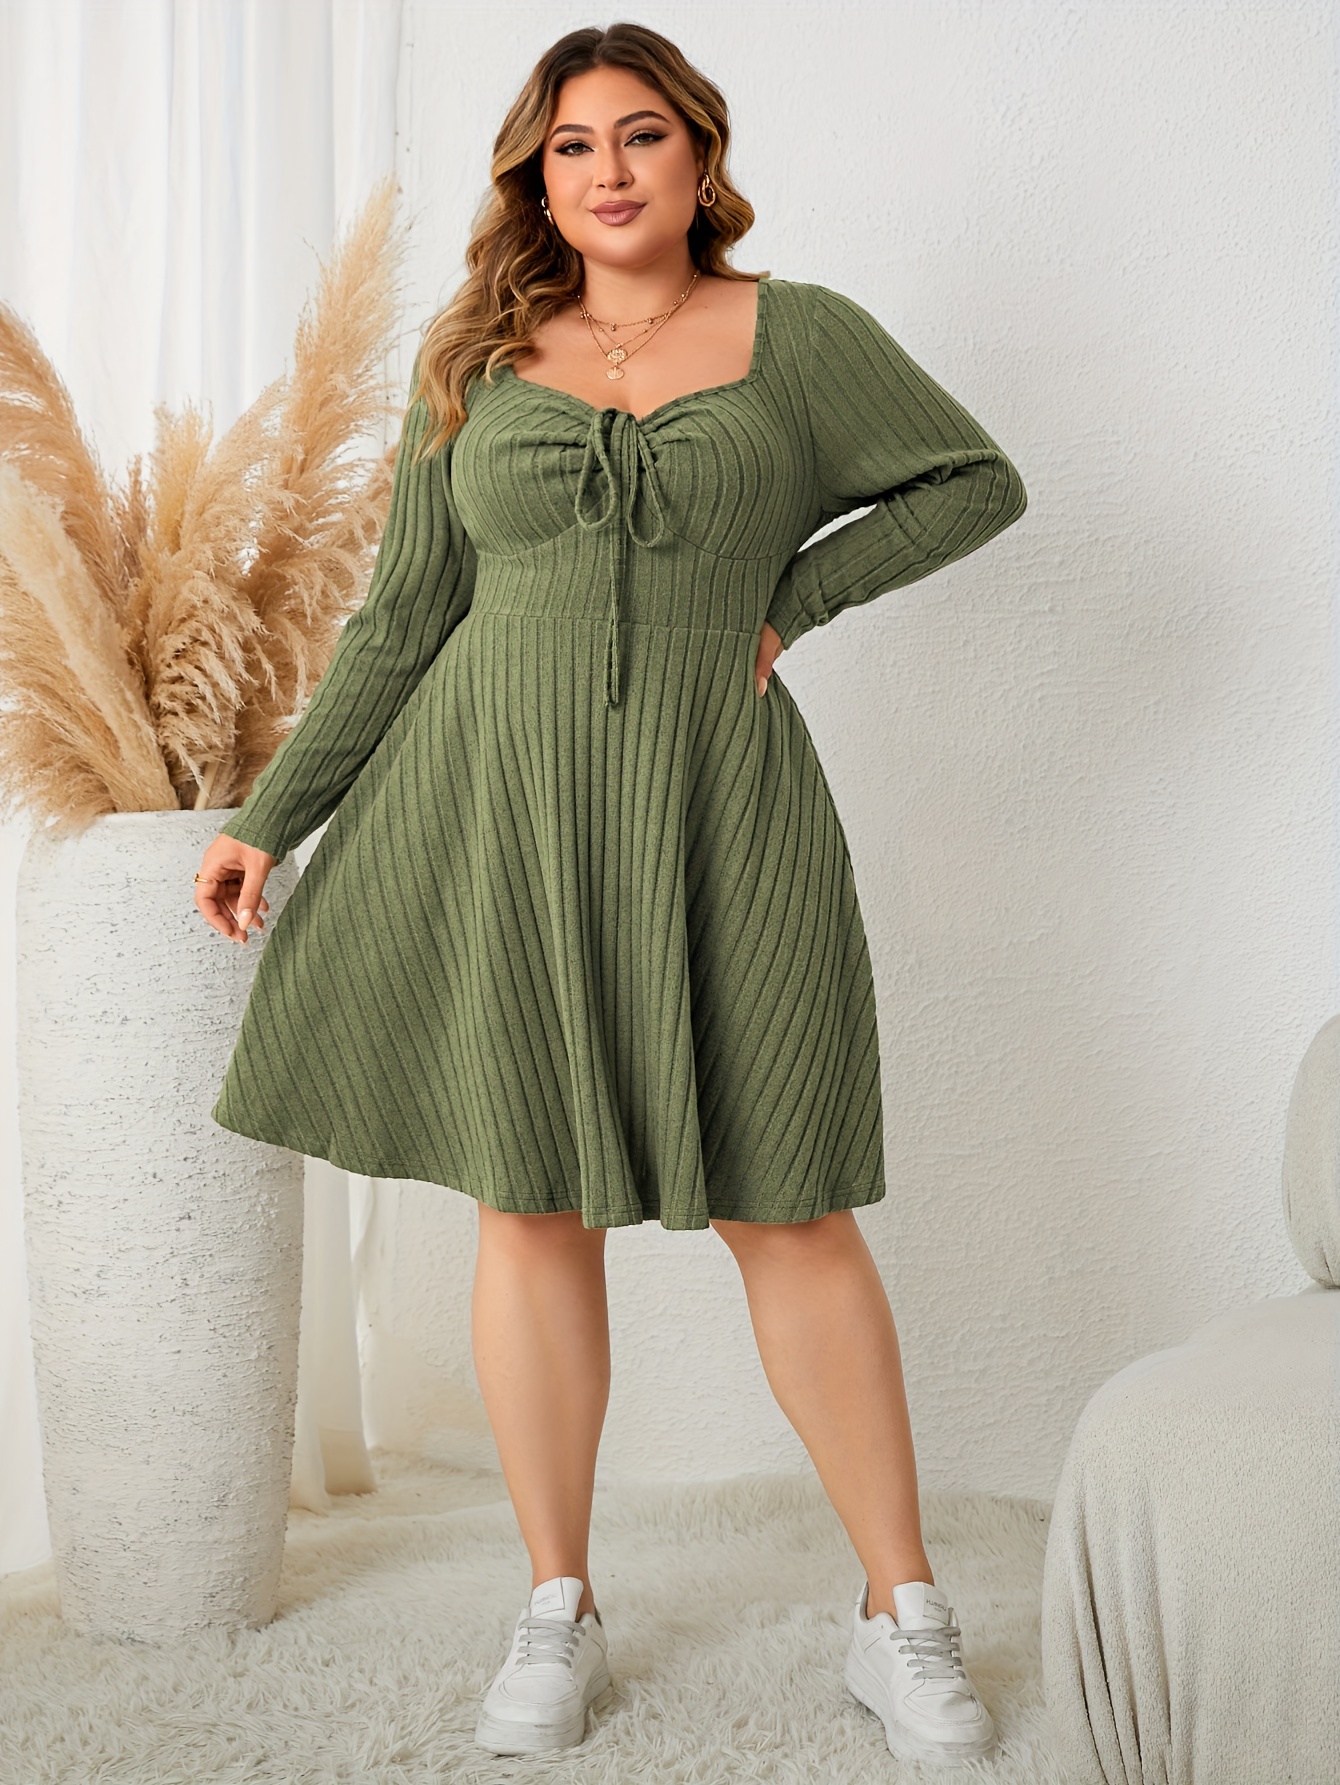 Plus Size Women's Winter Clothing & Outfits